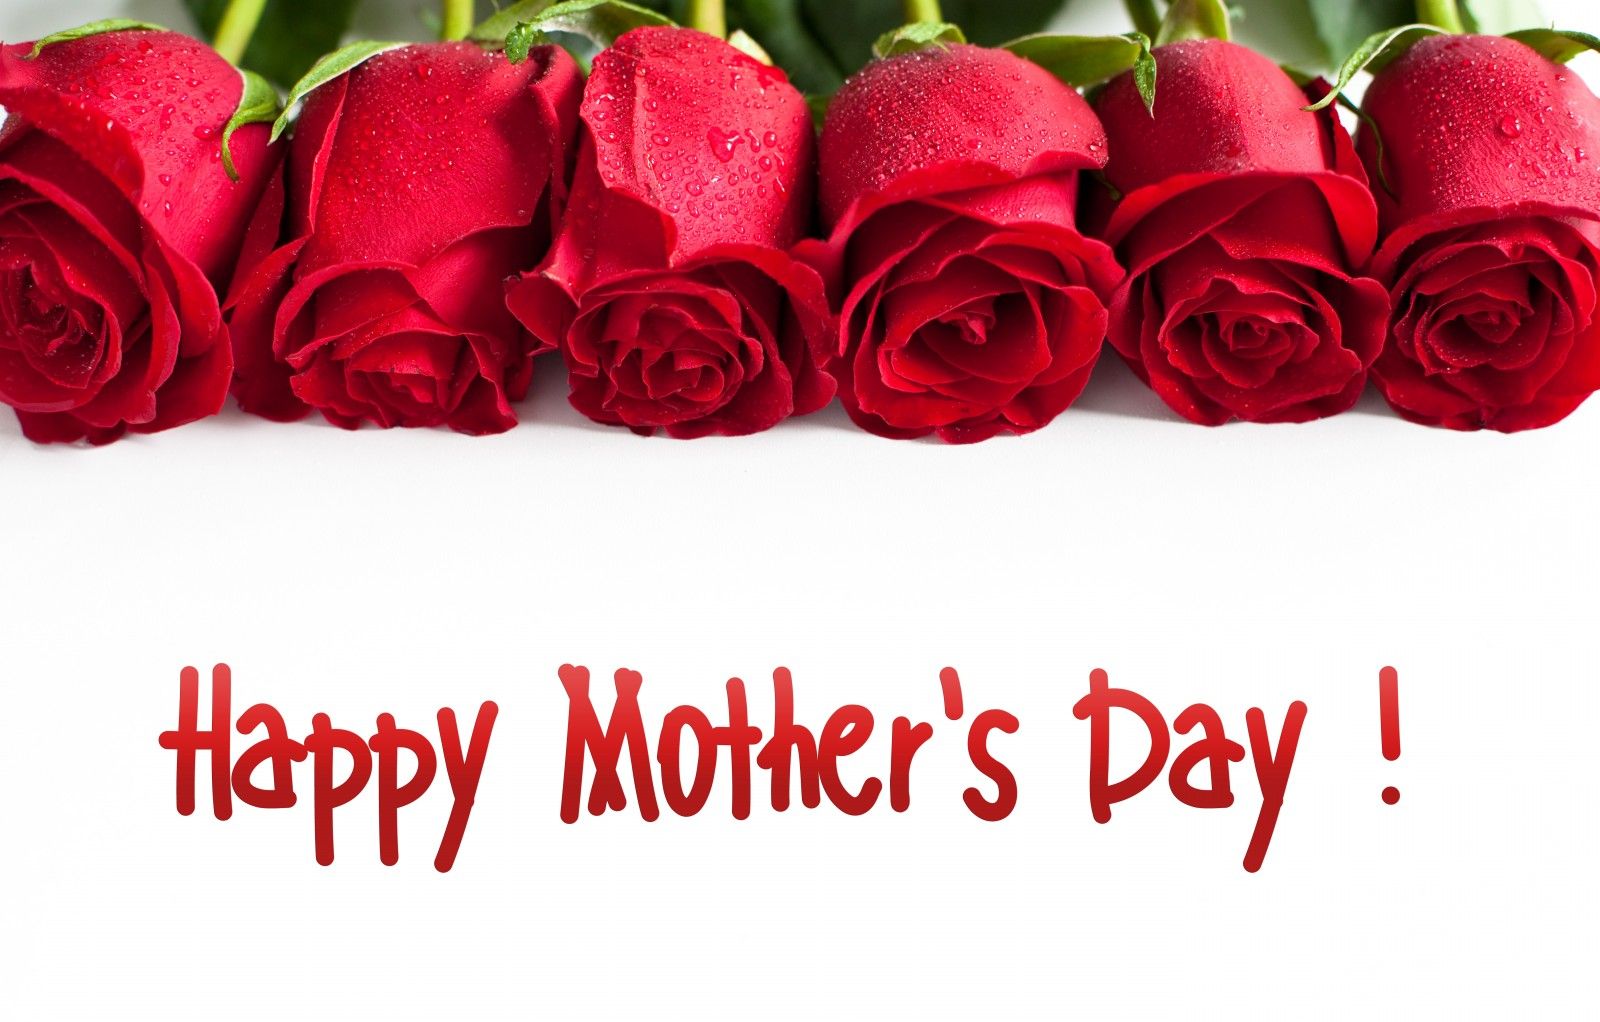 Happy Mothers Day image for Facebook, WhatsApp. Wish Mothers day